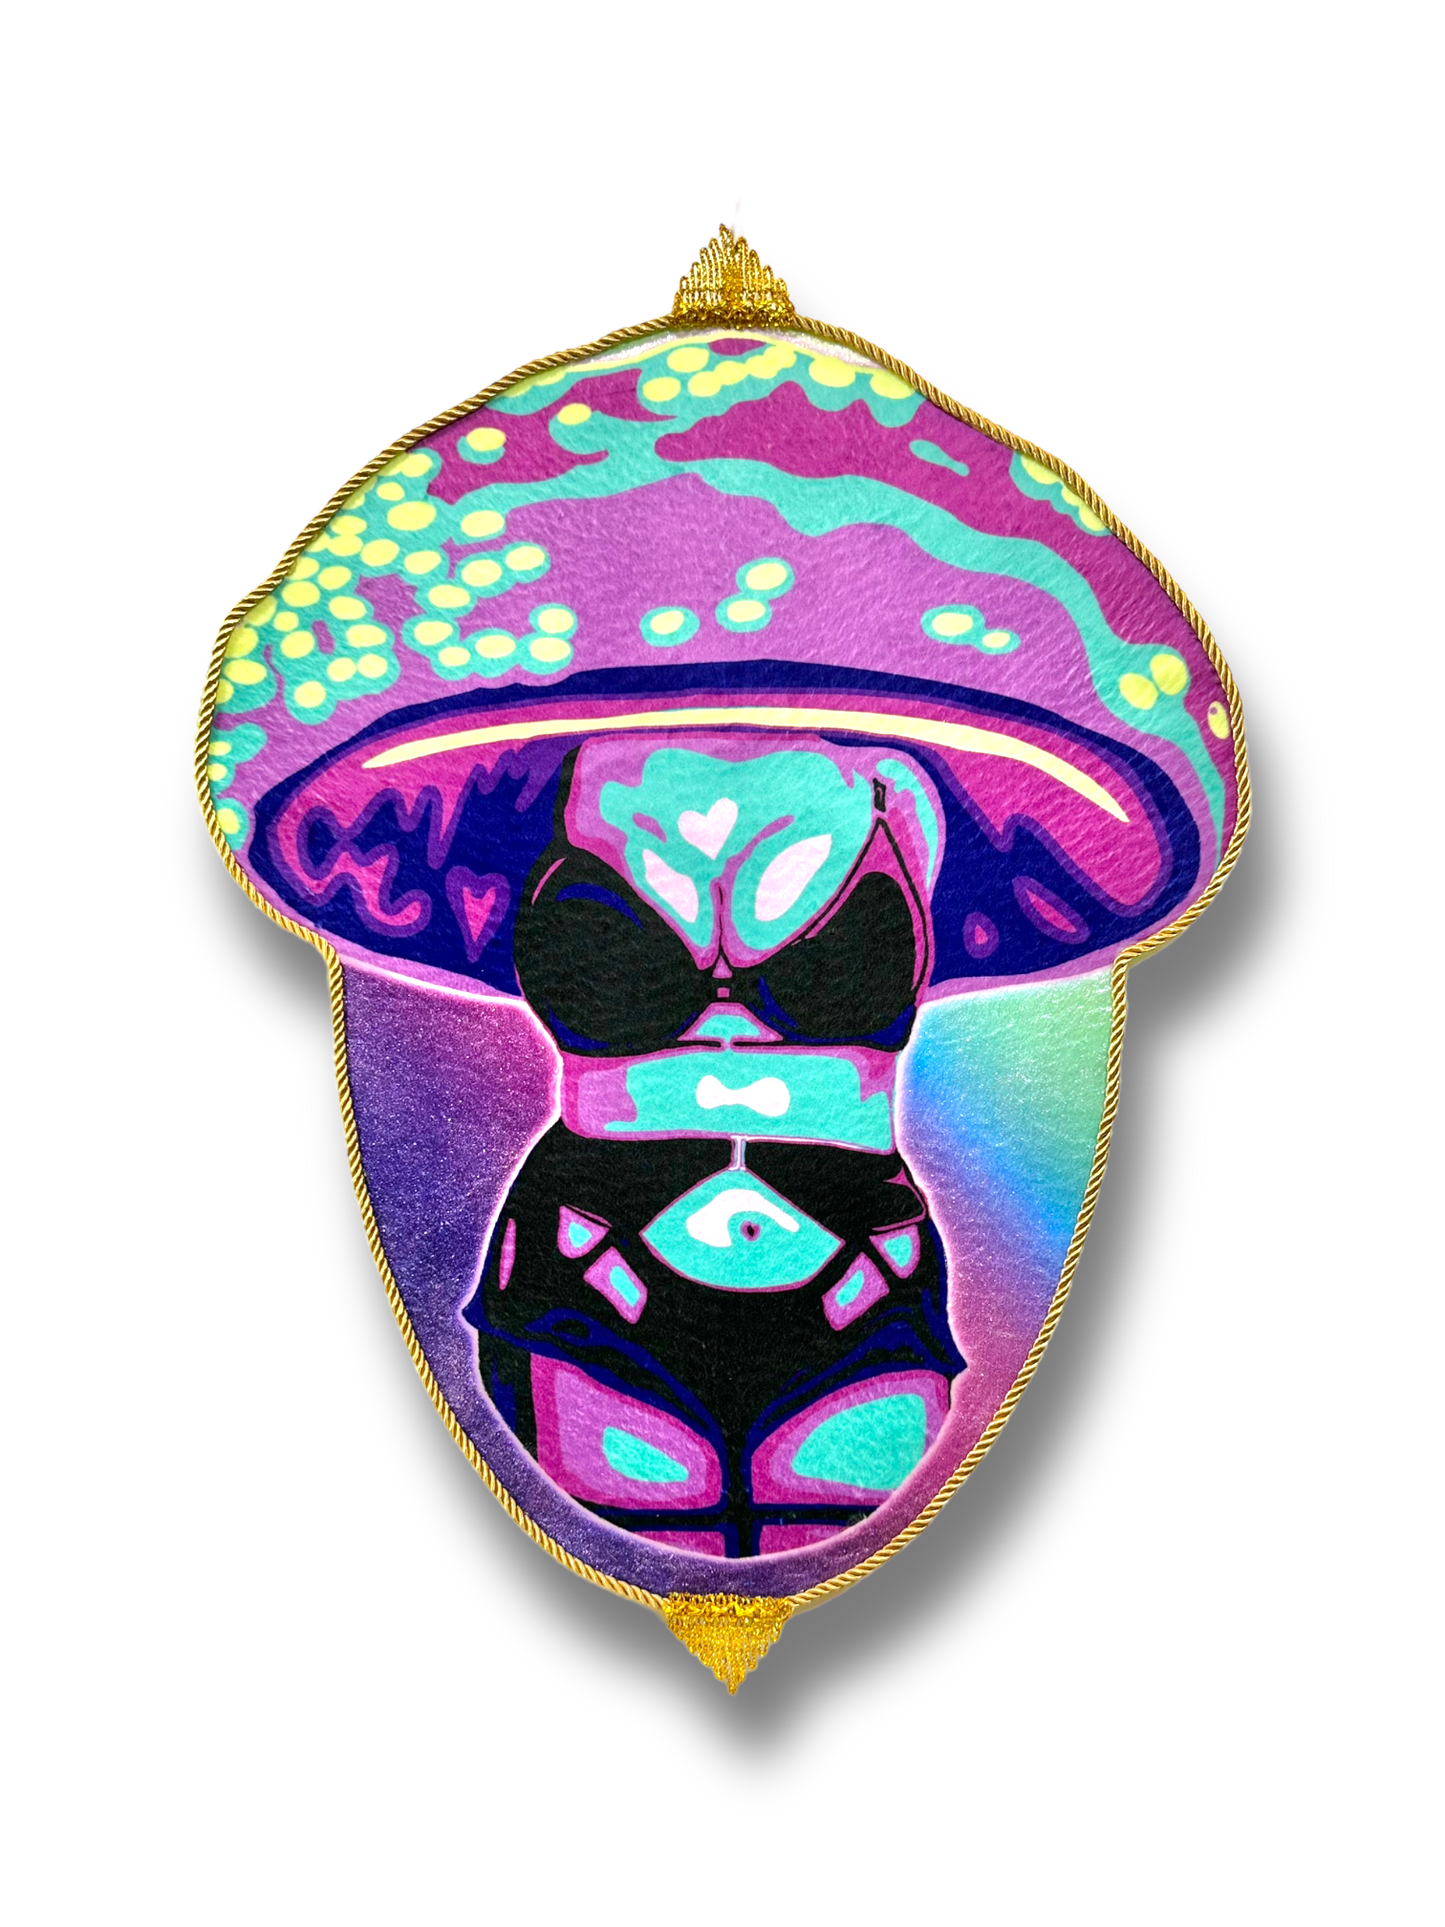 ⏳(Not sold out) WAITLIST 🗓️ for Future Customized Velveteen Mushroom Portrait Tapestry✨